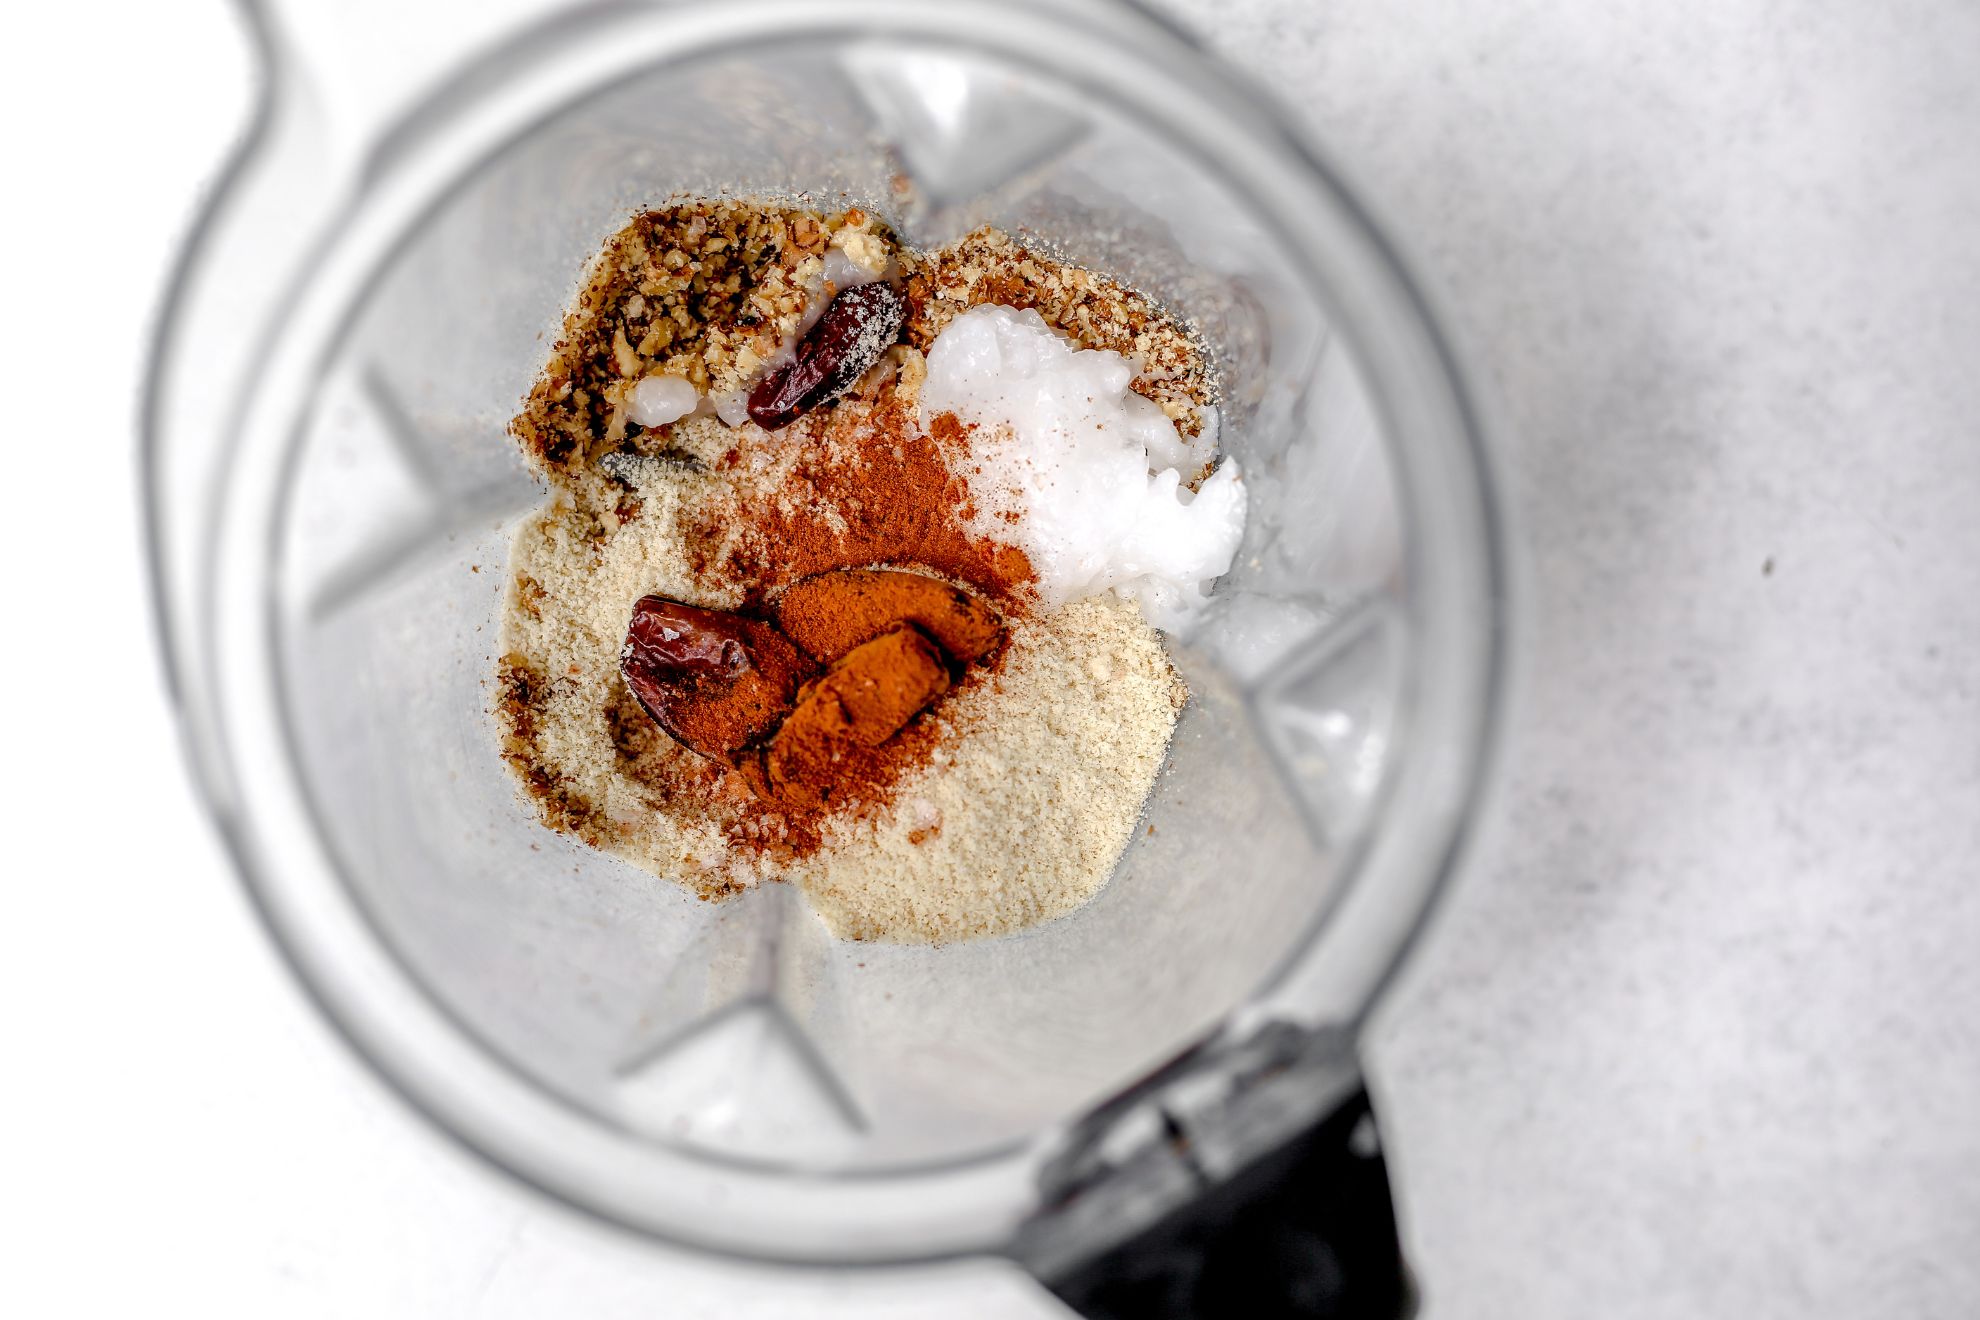 This is an overhead horizontal image looking into a blender. The blender sits on a white surface with ingredients in it. The ingredients appear to be walnuts, almond flour, dates, coconut oil, and cinnamon.